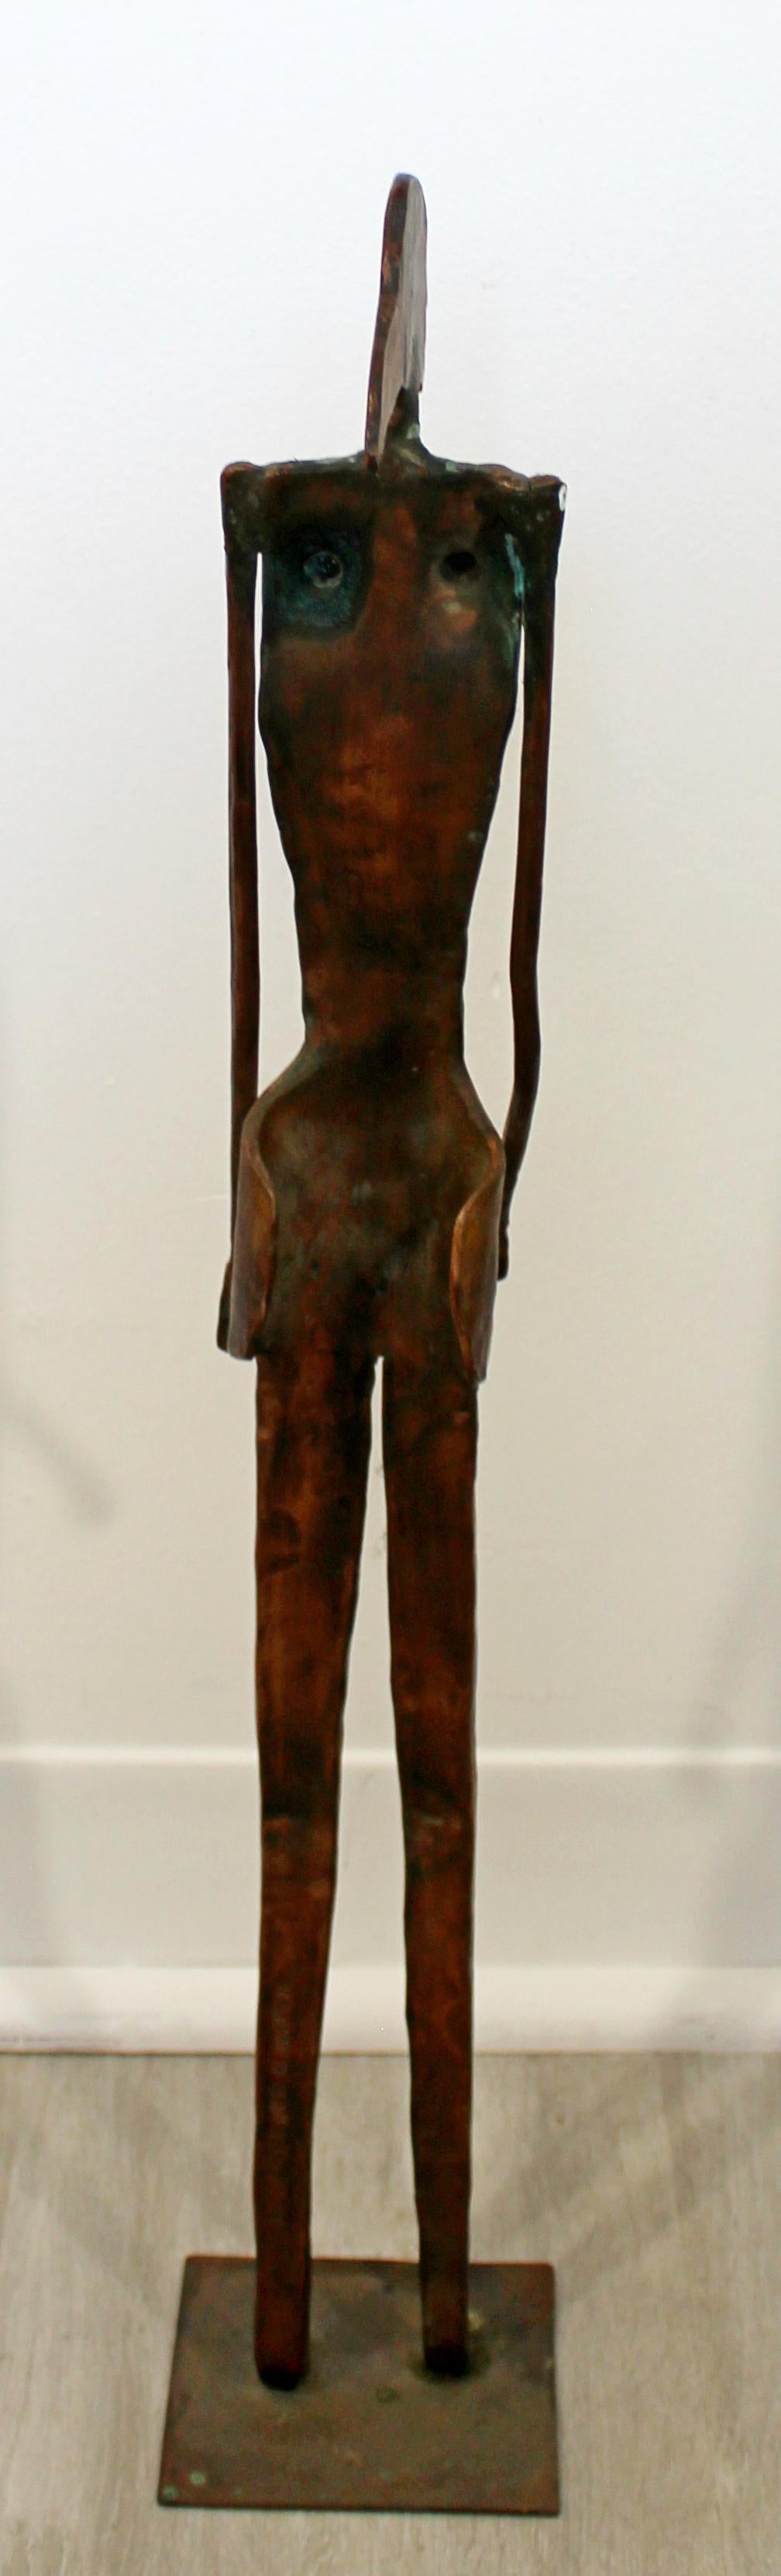 Metal Contemporary Forged Copper Female Nude Figure Table Sculpture Signed Hansen 2001